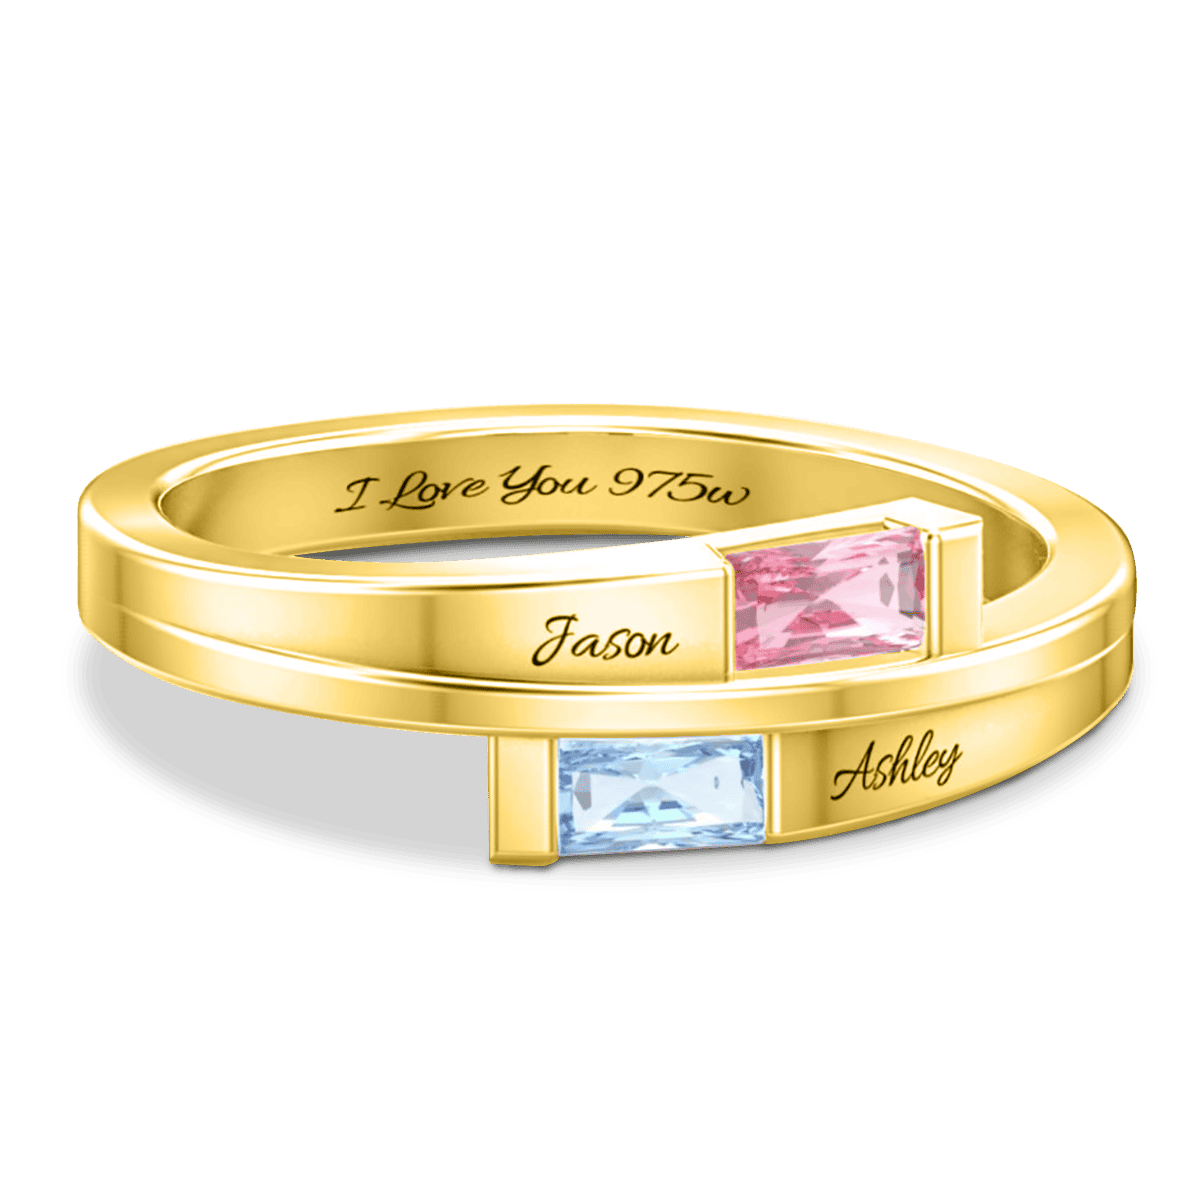 Personalized Double Princess Cut Birthstones Ring - S925 Sterling Silver